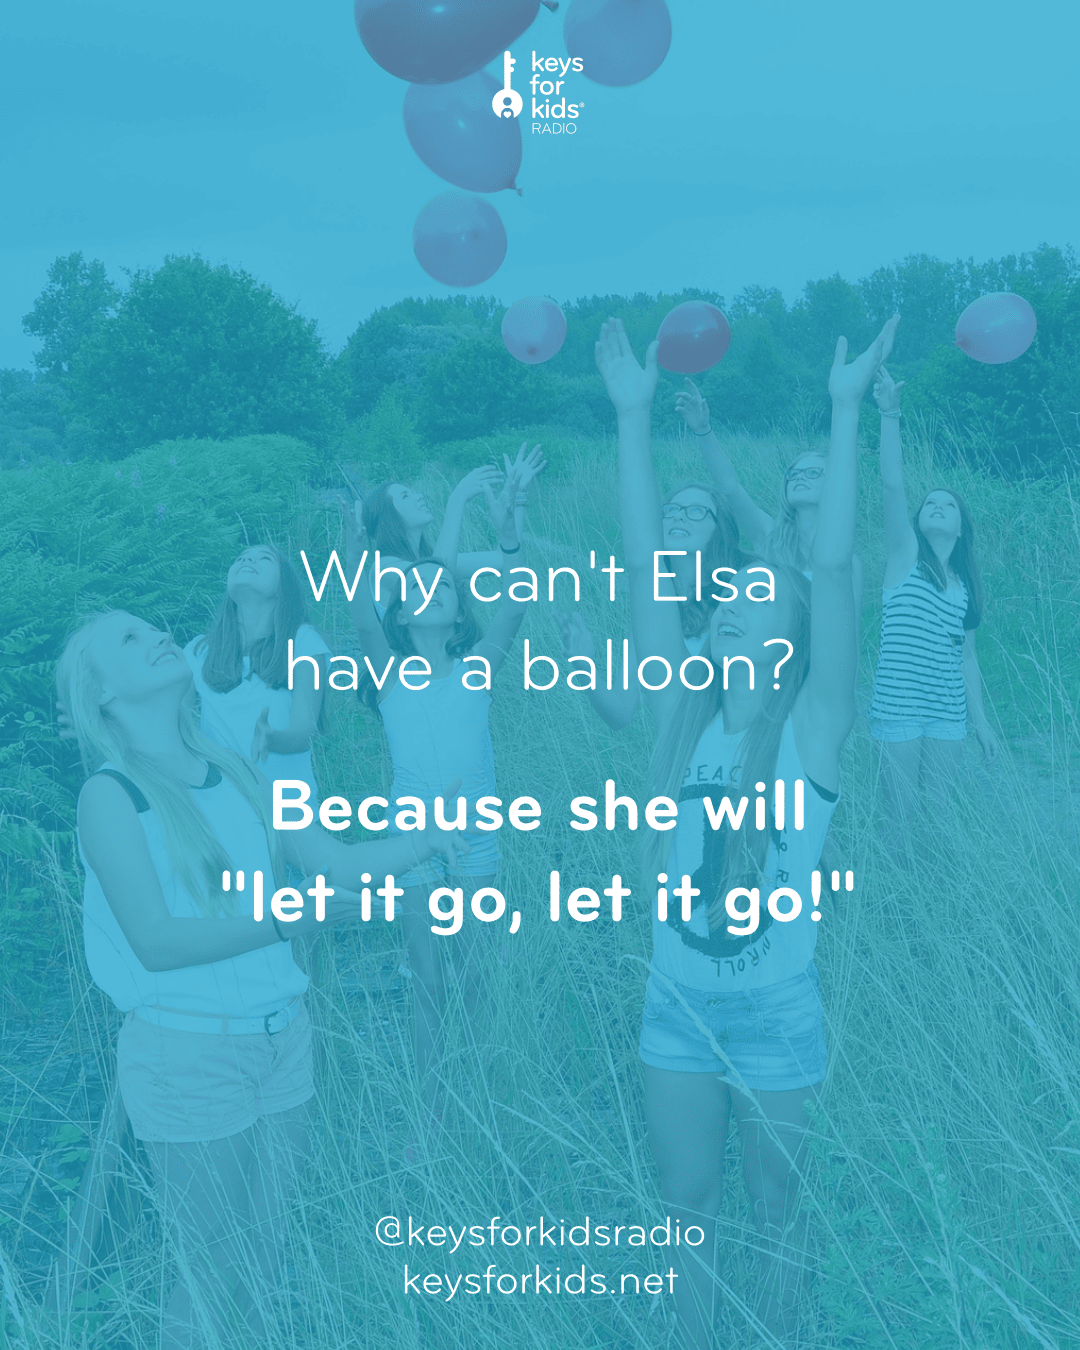 Why can’t Elsa have a balloon? Because she will “let it go, let it go.”